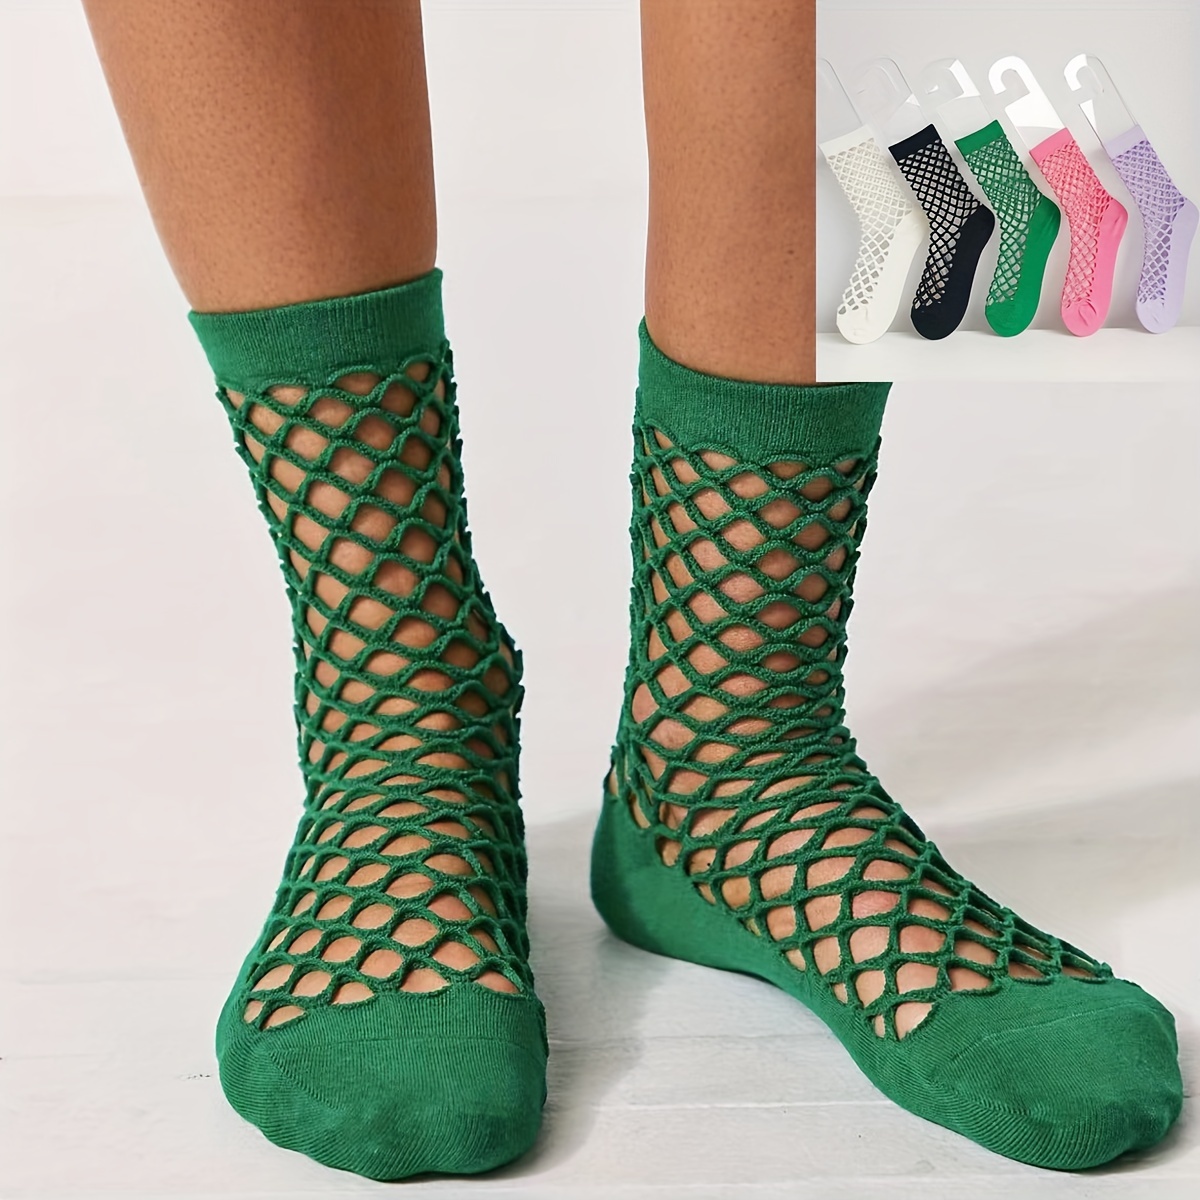 

5 Pairs Fishnet Solid Socks, Comfy & Breathable Hollow Out Socks, Women's Stockings & Hosiery